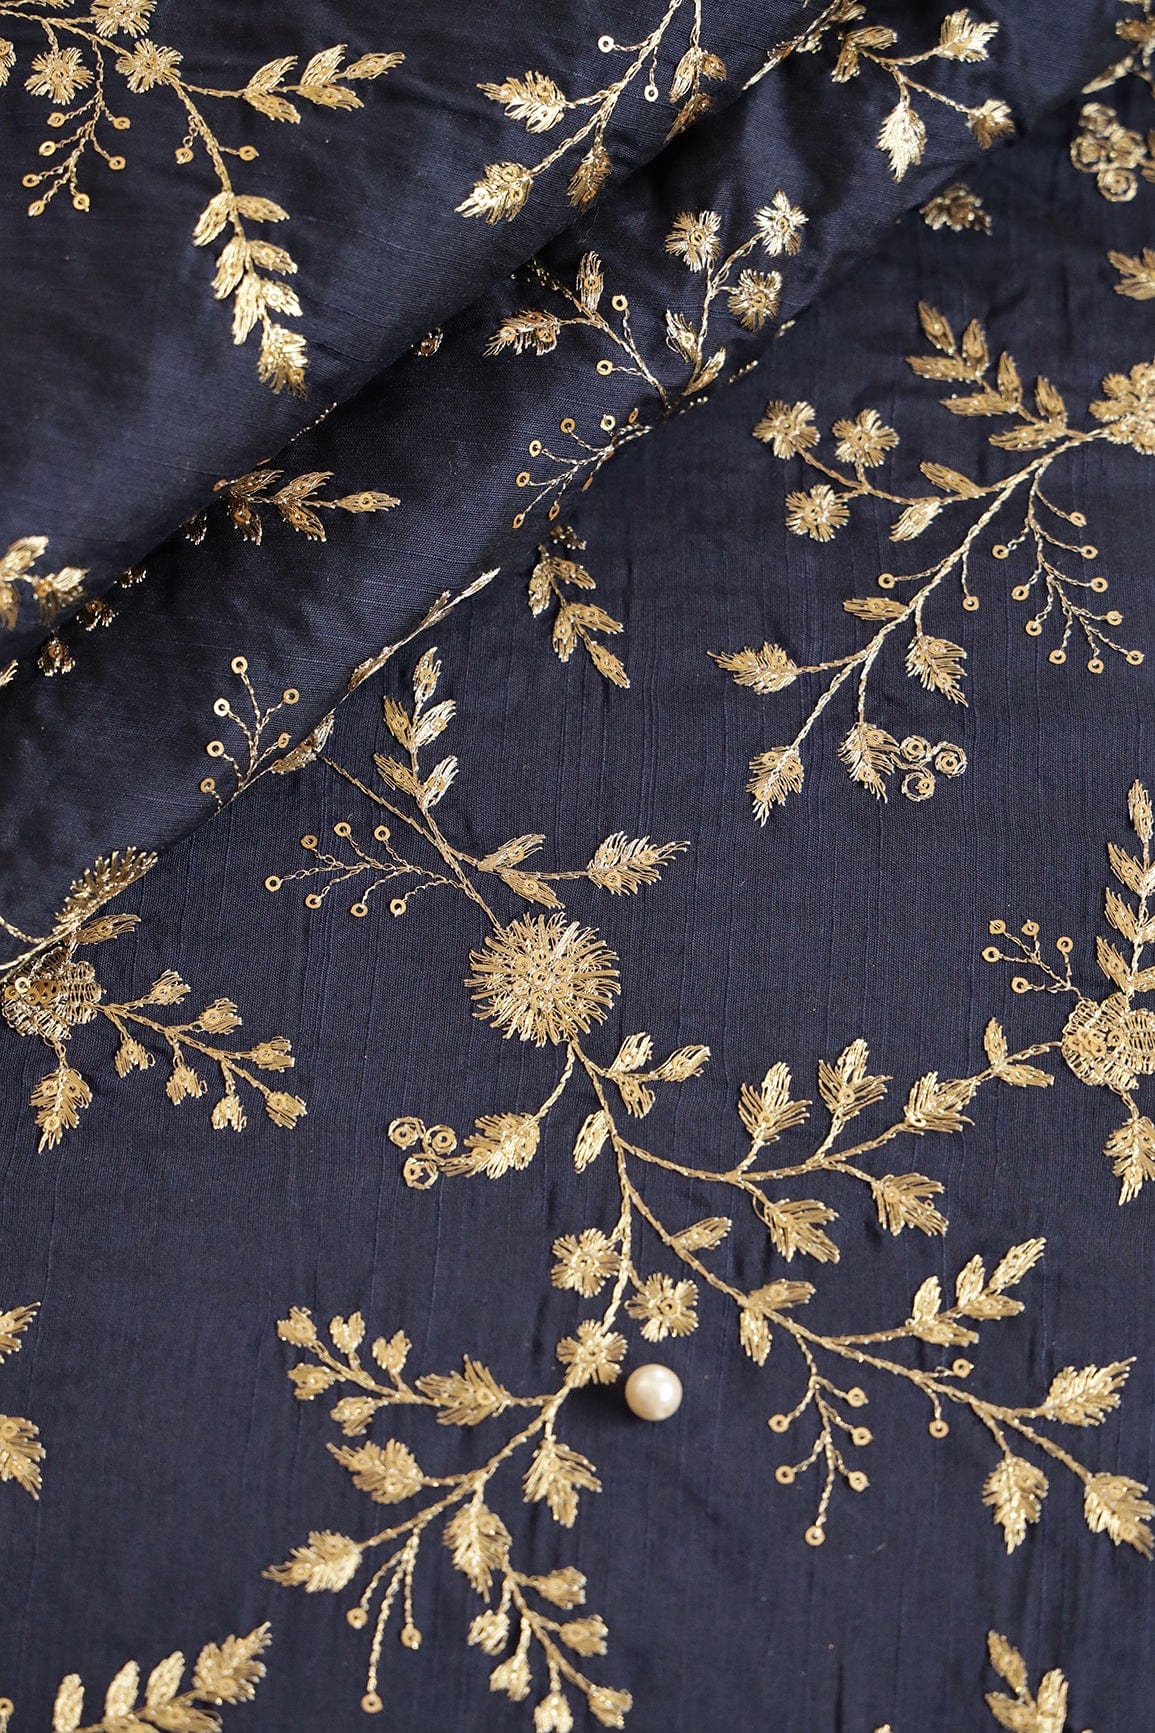 doeraa Embroidery Fabrics Gold Sequins With Gold Zari Floral Embroidery Work On Navy Blue Raw Silk Fabric